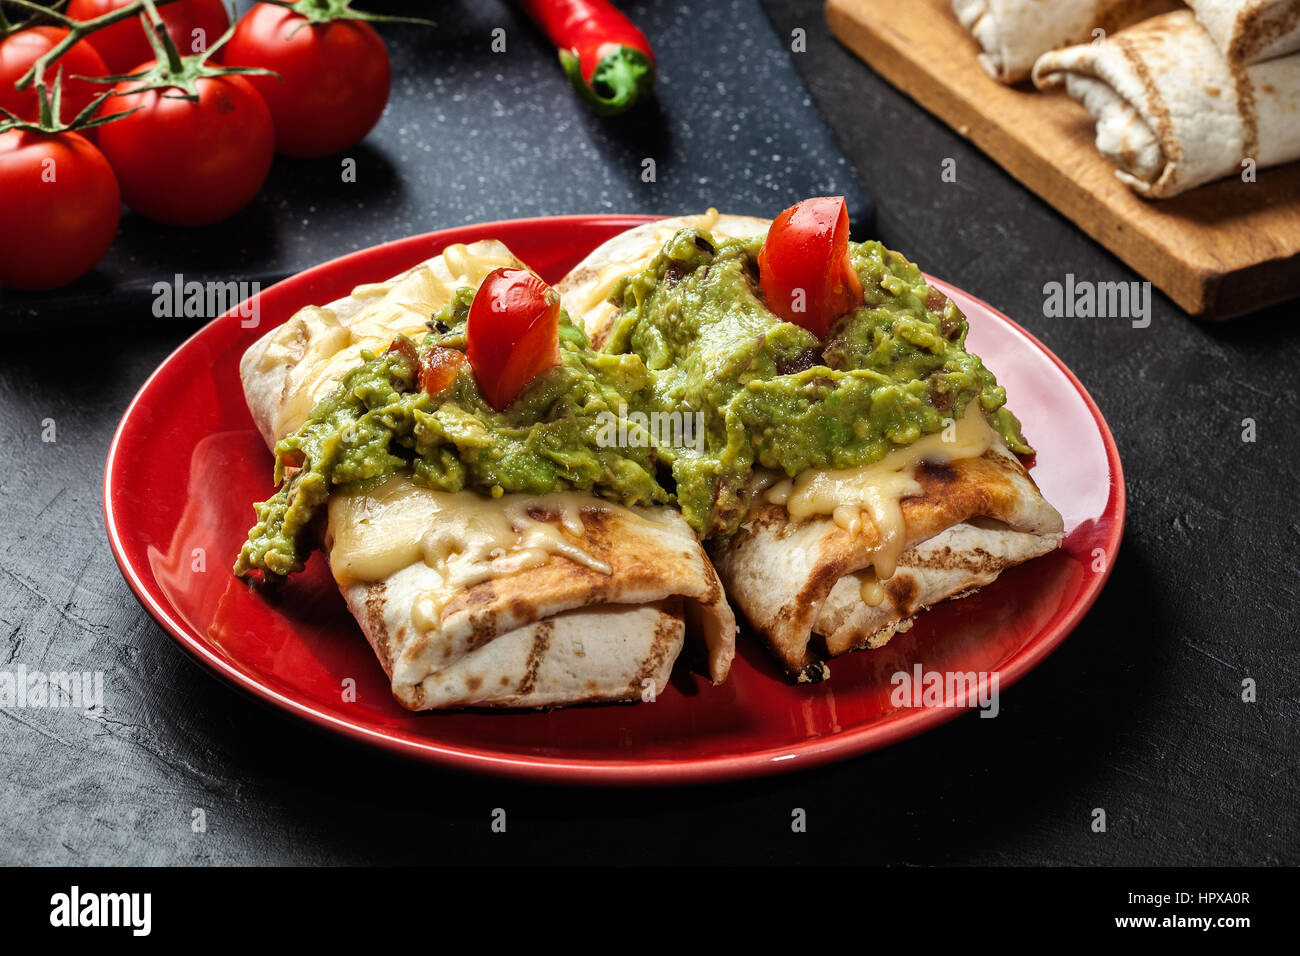 Mexican chimichanga with guacamole dip on a red plate Stock Photo